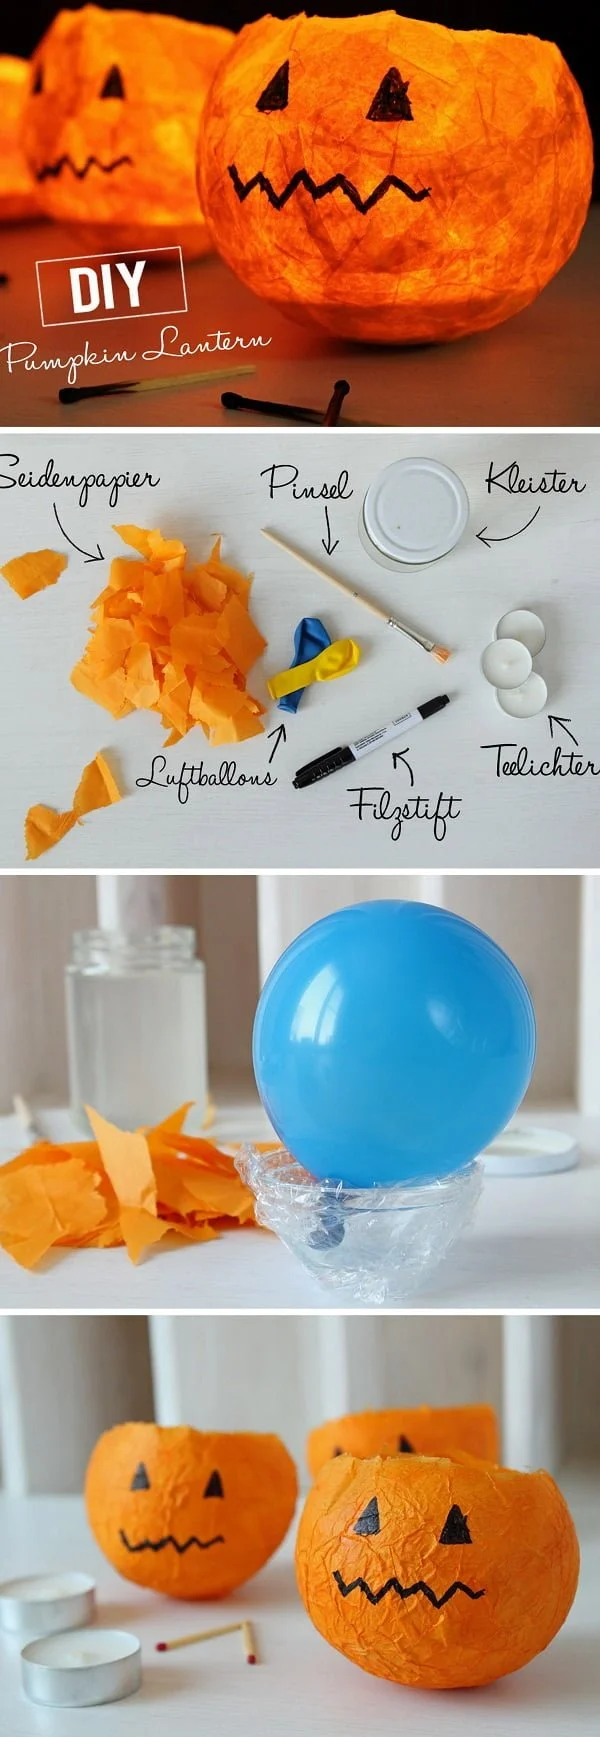 Check out the tutorial on how to make DIY pumpkin wind lanterns for Halloween home decoration